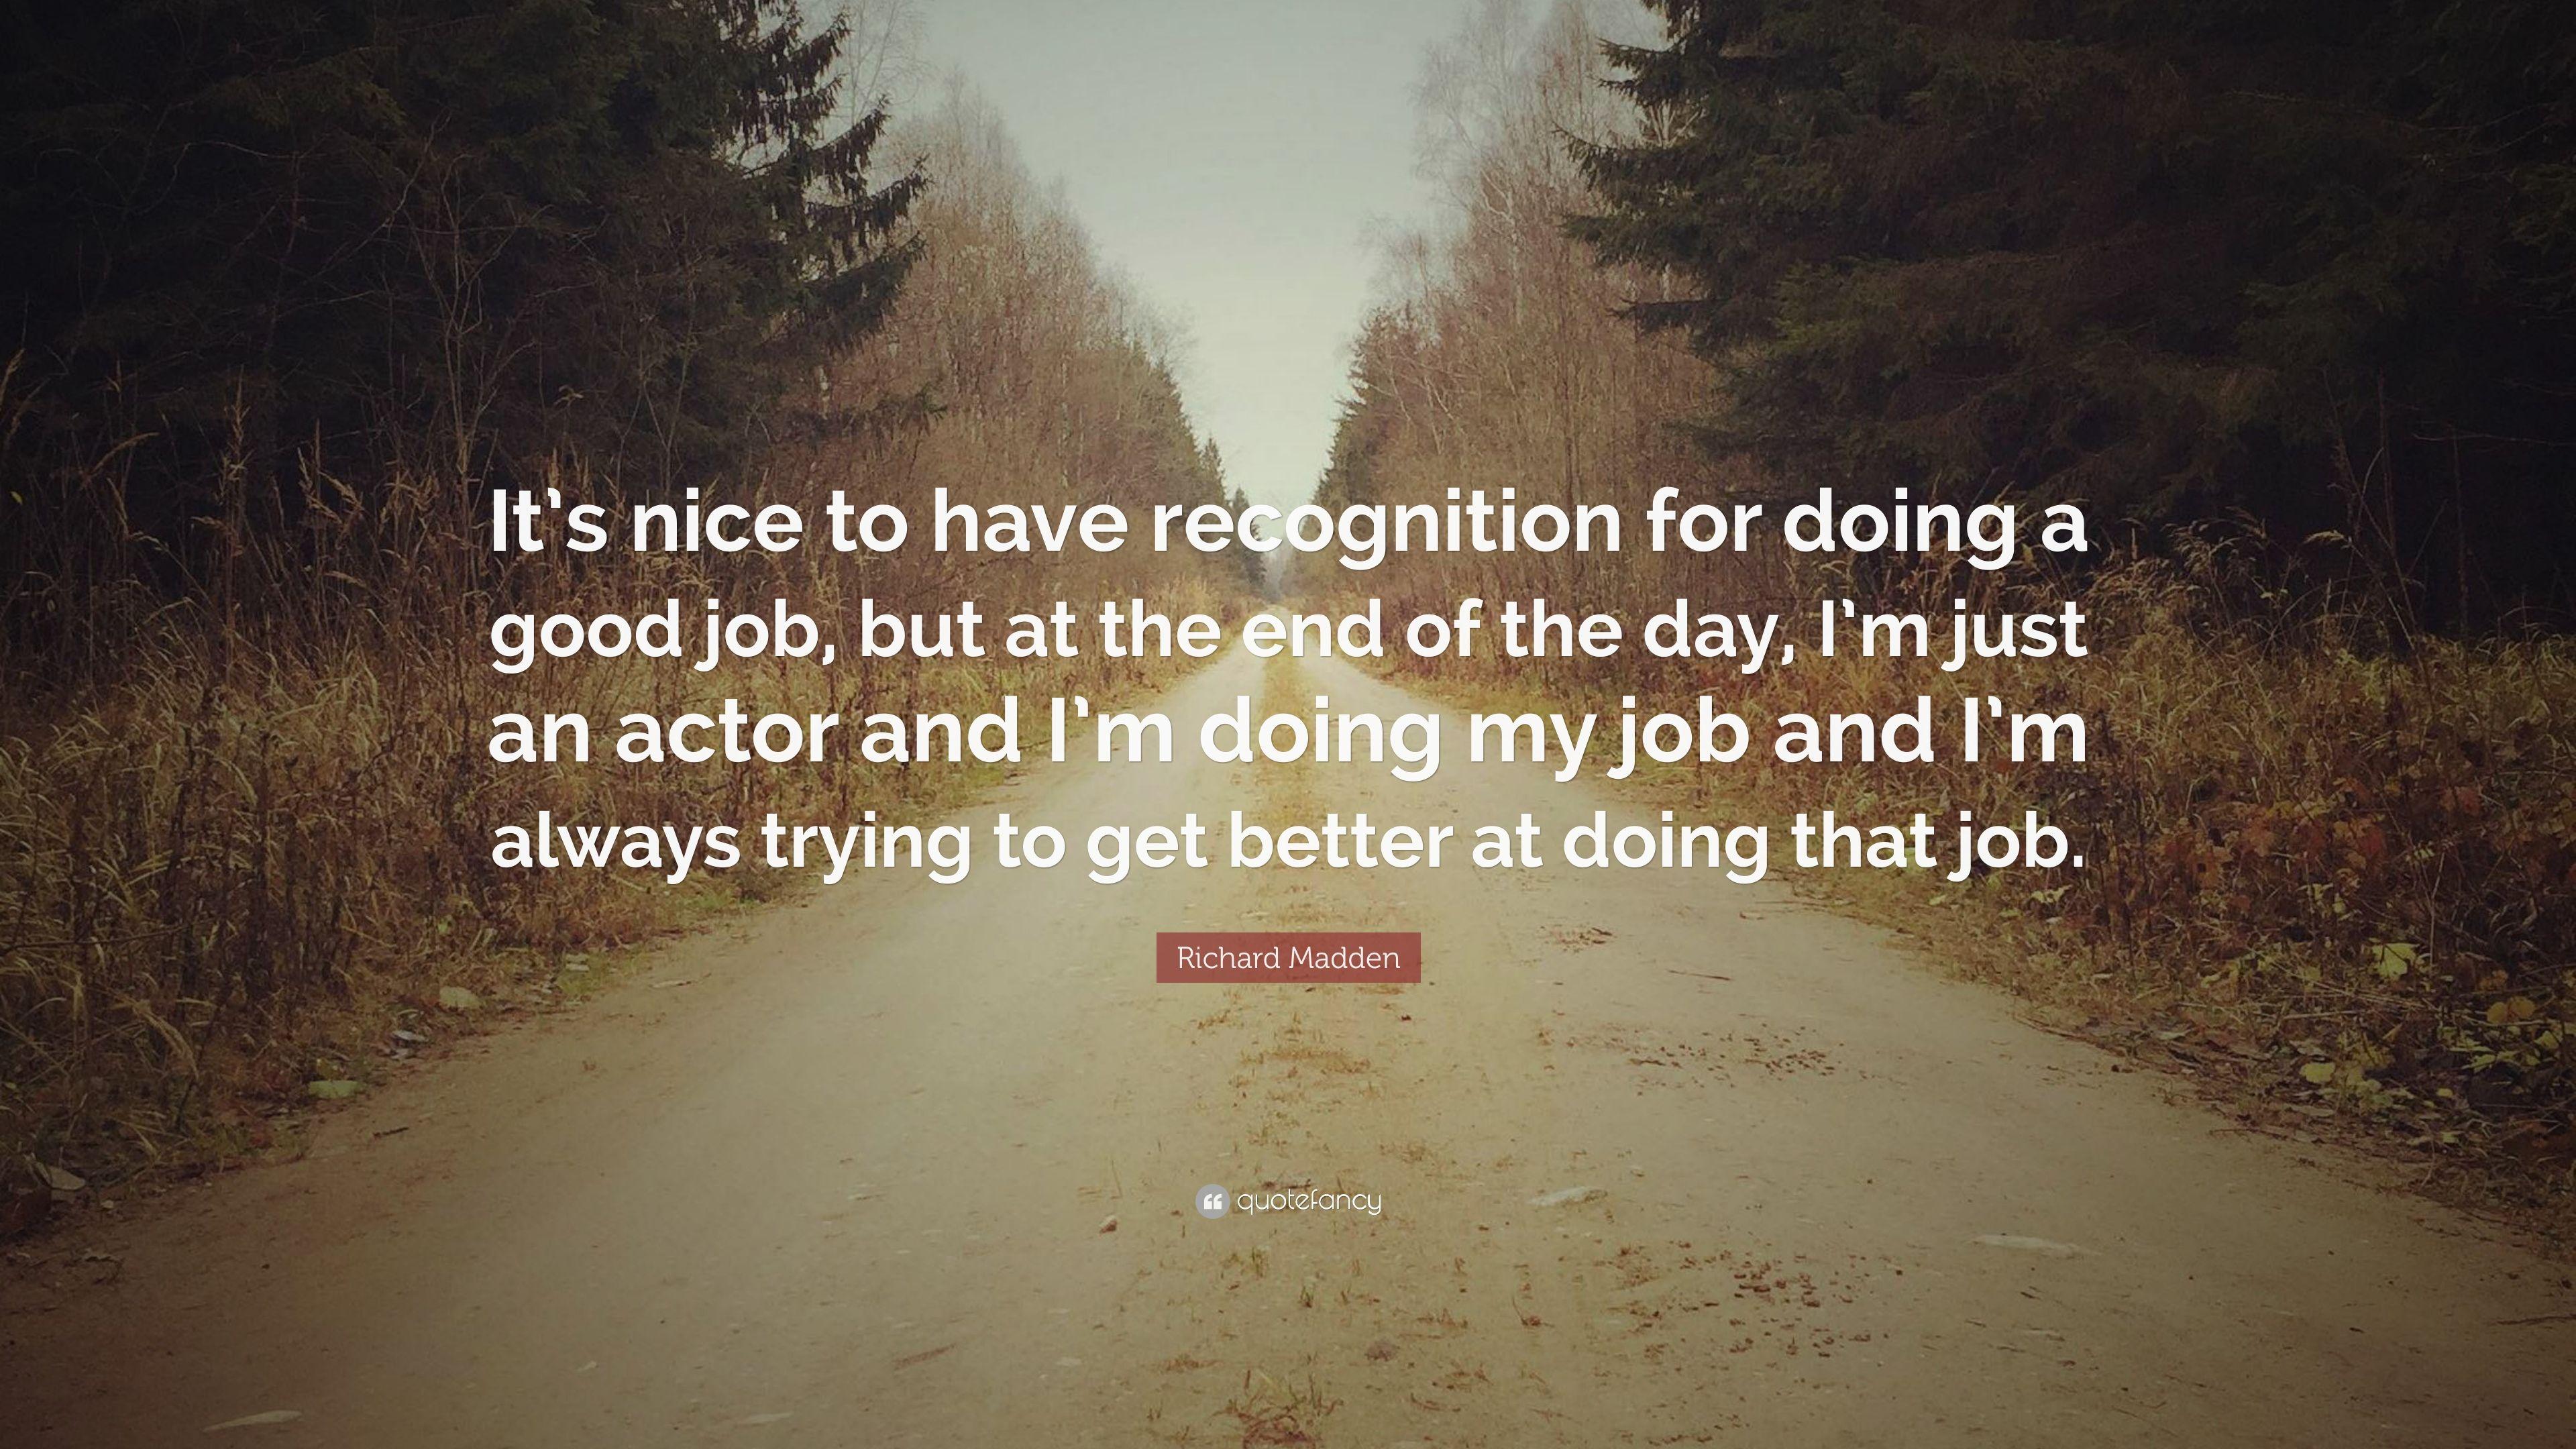 Richard Madden Quote: “It's nice to have recognition for doing a